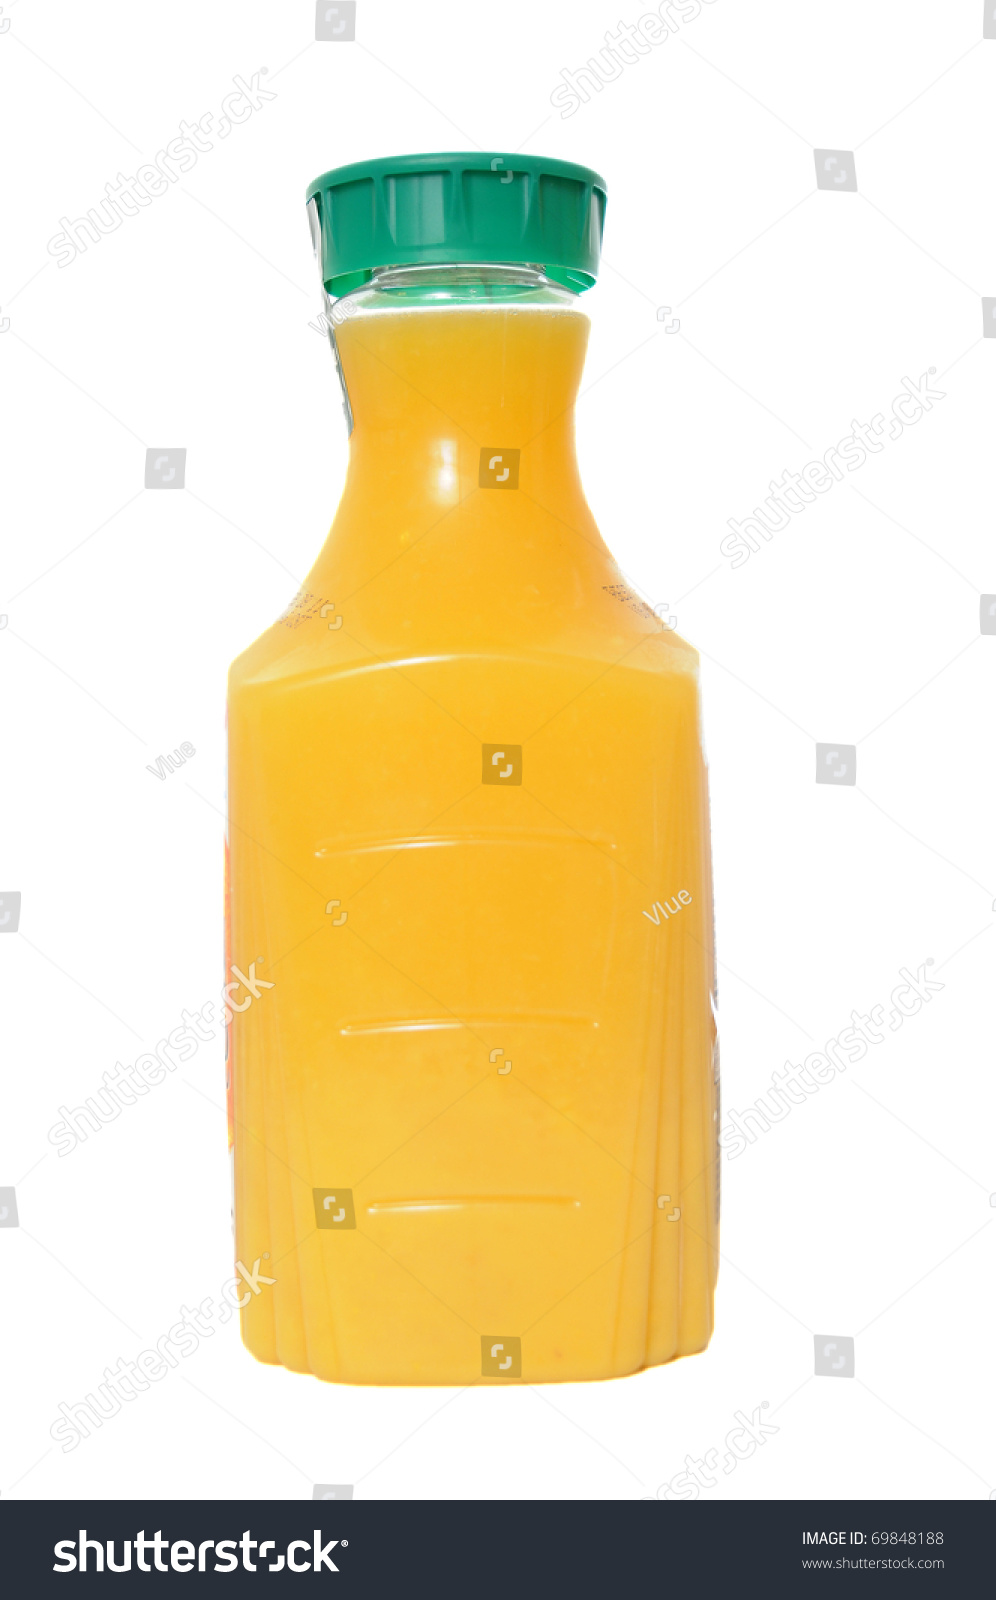 Download Orange Juice Plastic Container Jug Isolated Transportation Stock Image 69848188 PSD Mockup Templates